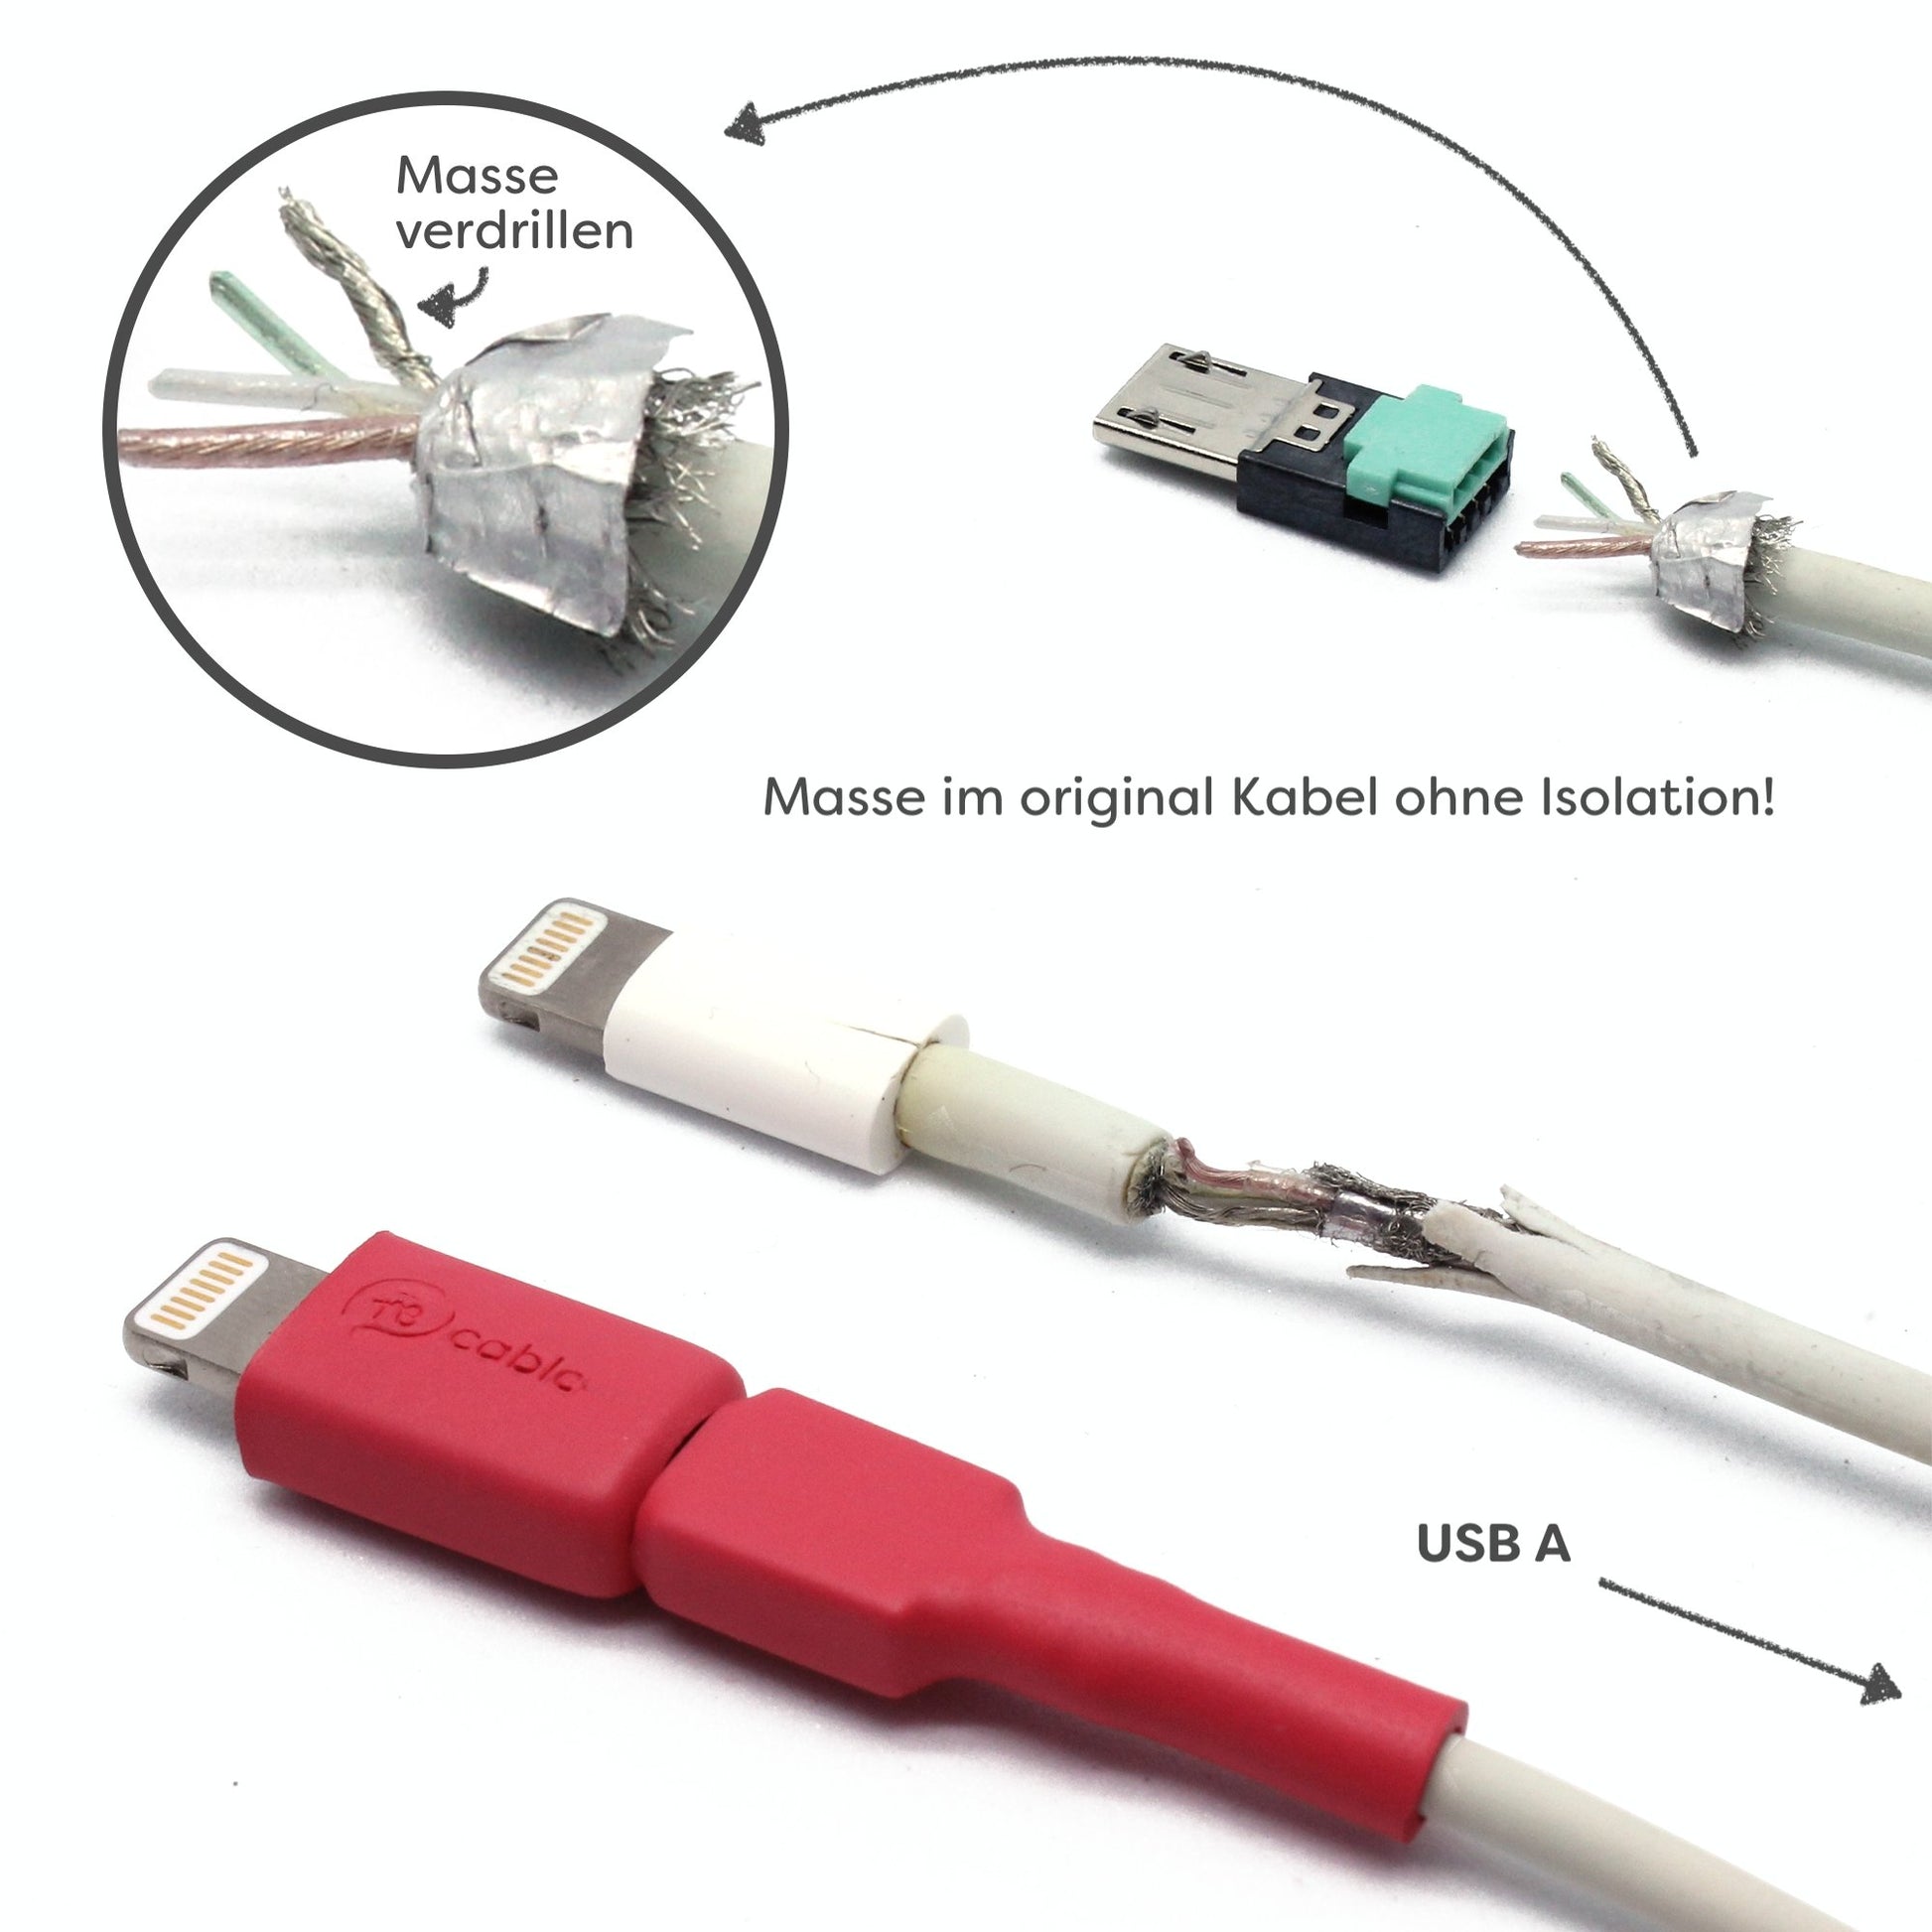 Lightning (iPhone) connector USB 2.0, spare parts set